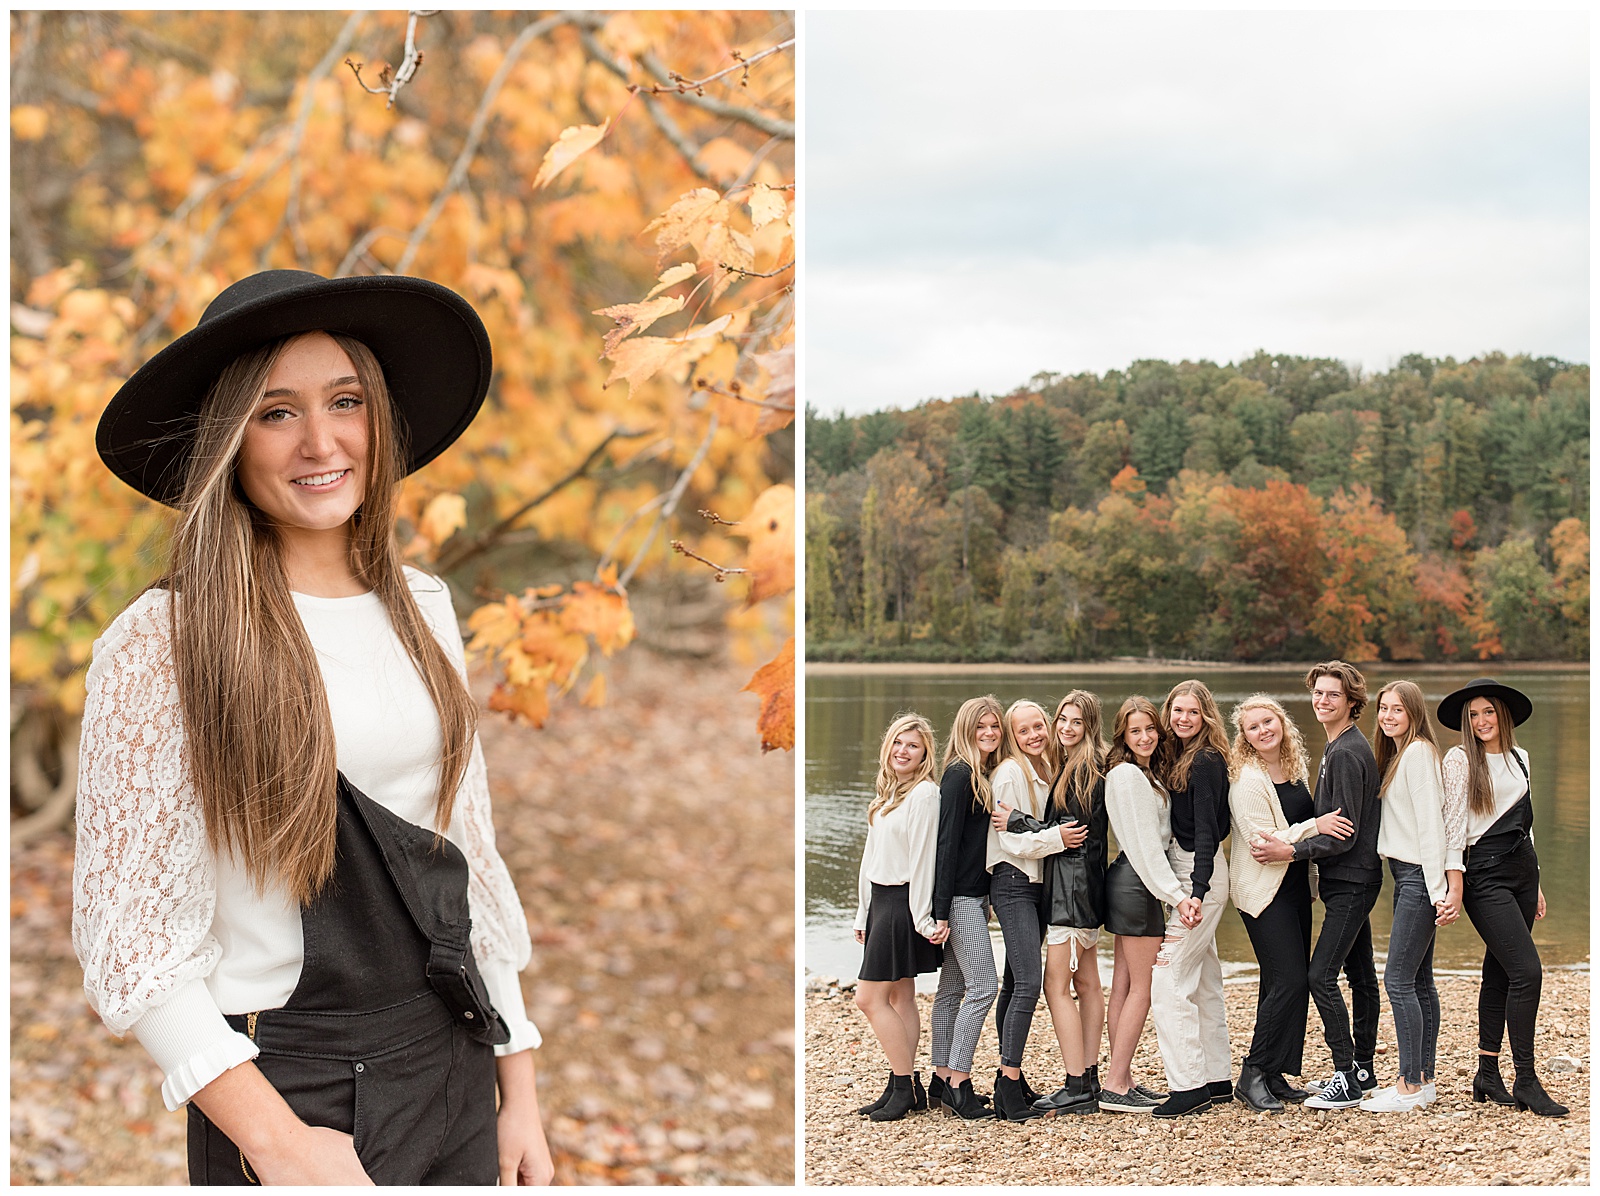 senior girl spokesmodel wearing ivory shirt with black overalls and black trendy hat smiling at camera with colorful fall tree behind her